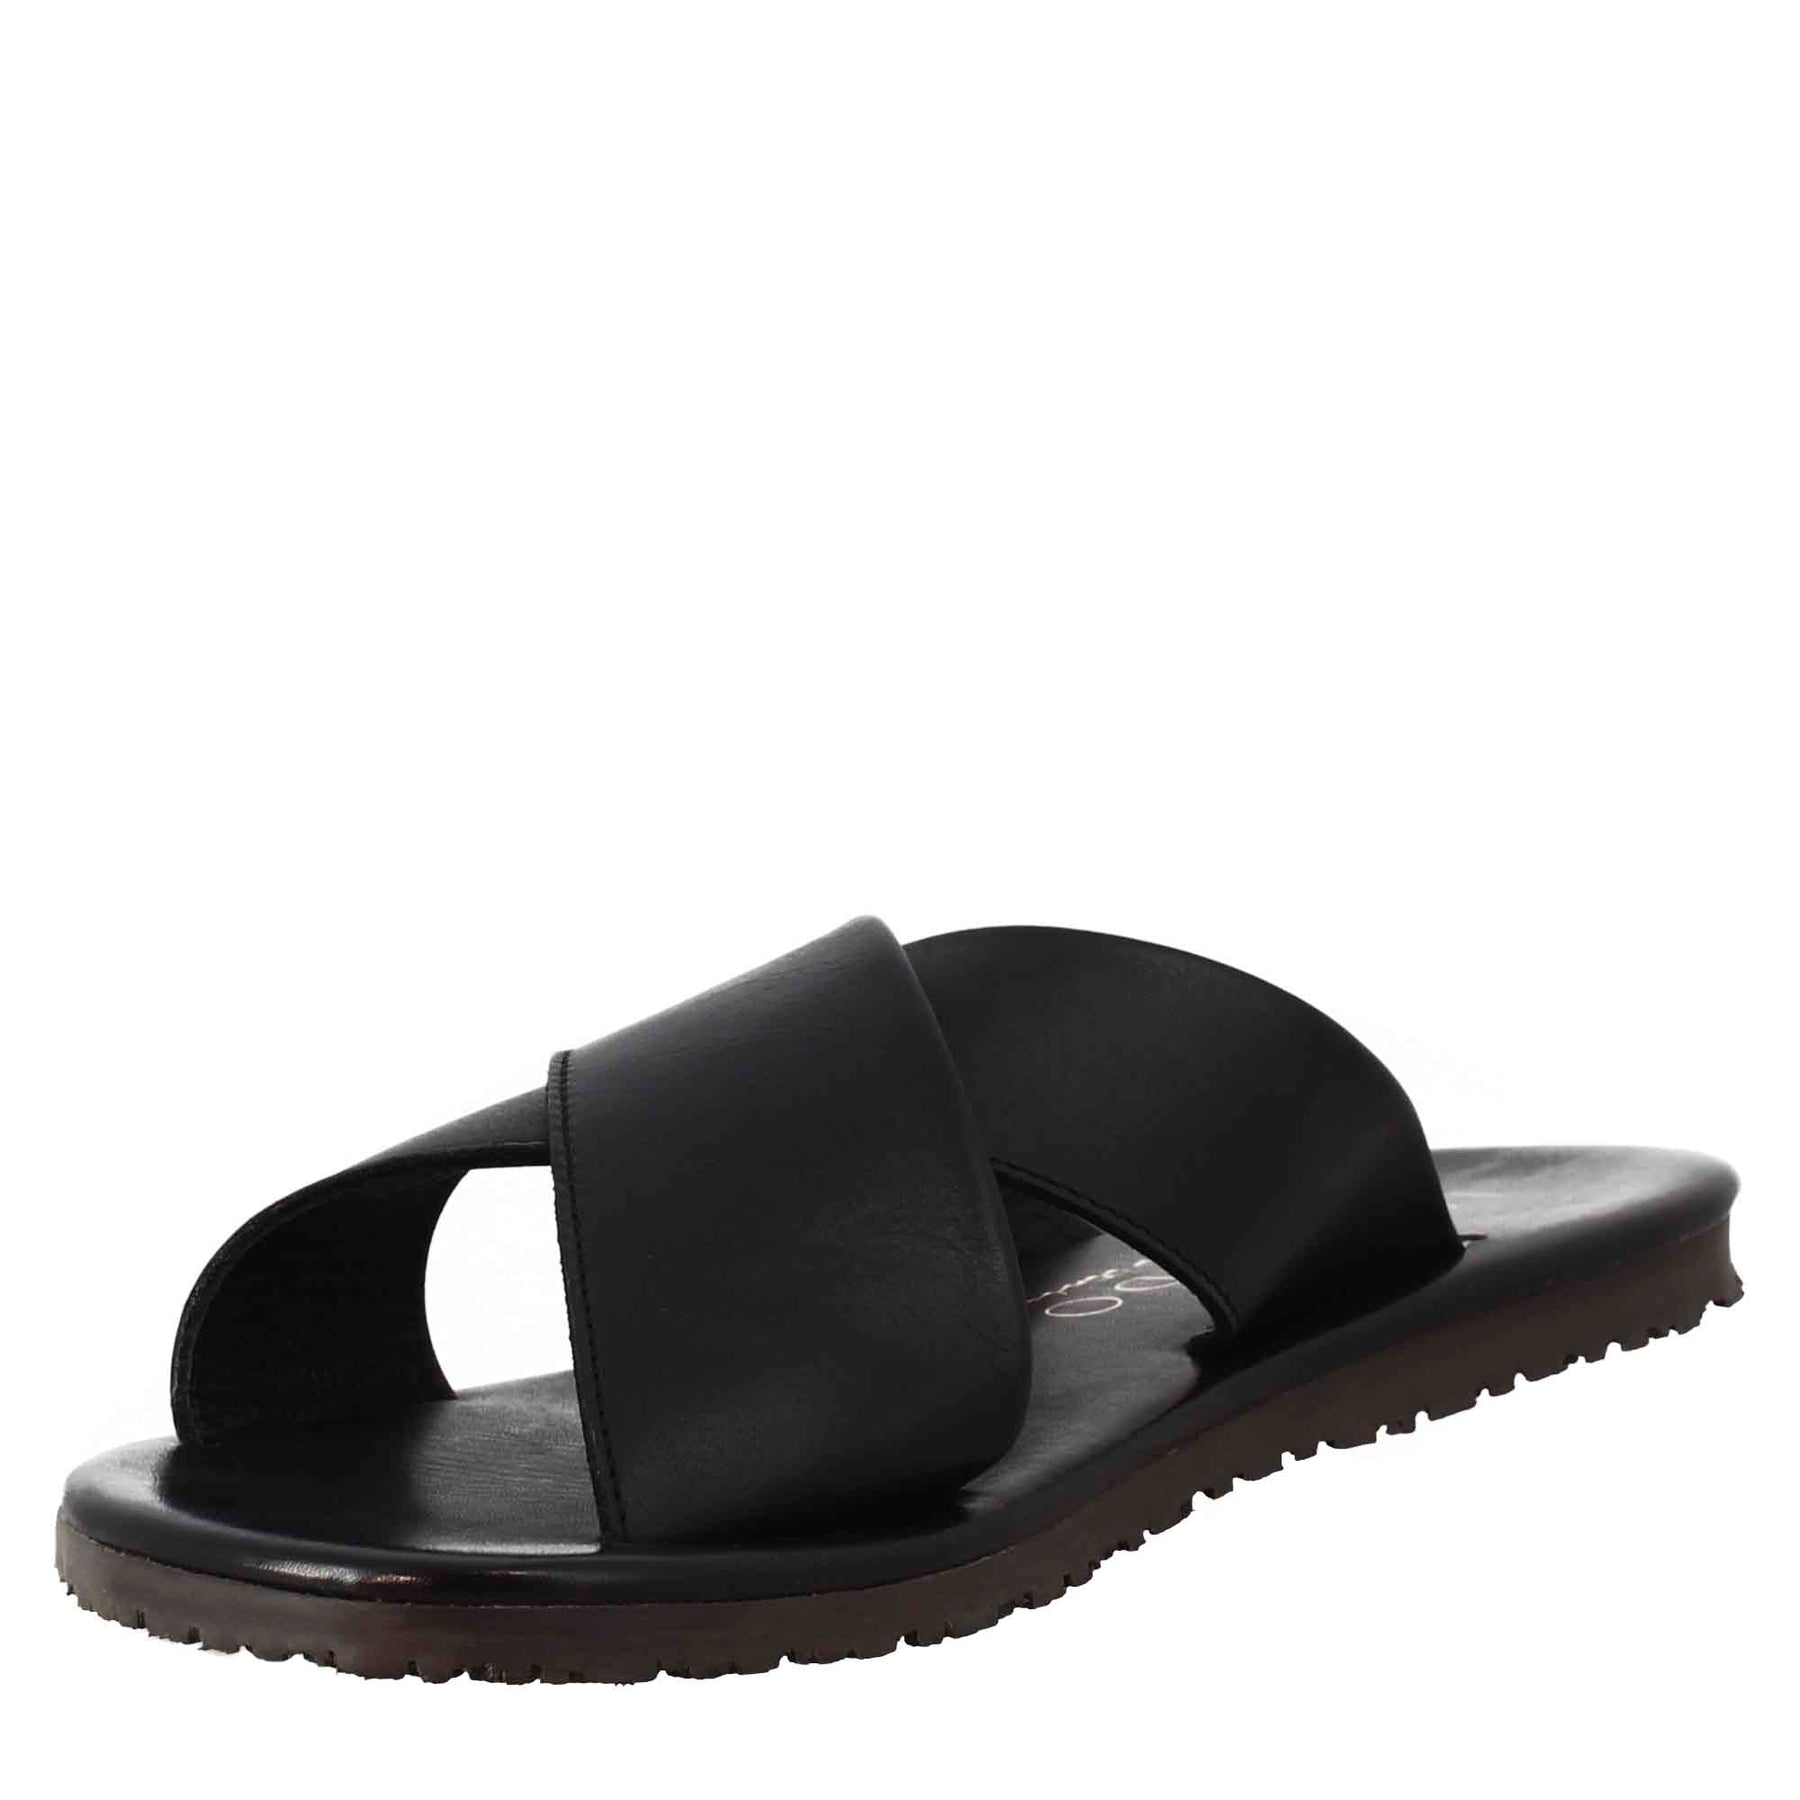 Men's handmade slipper sandals with crossed bands in black leather